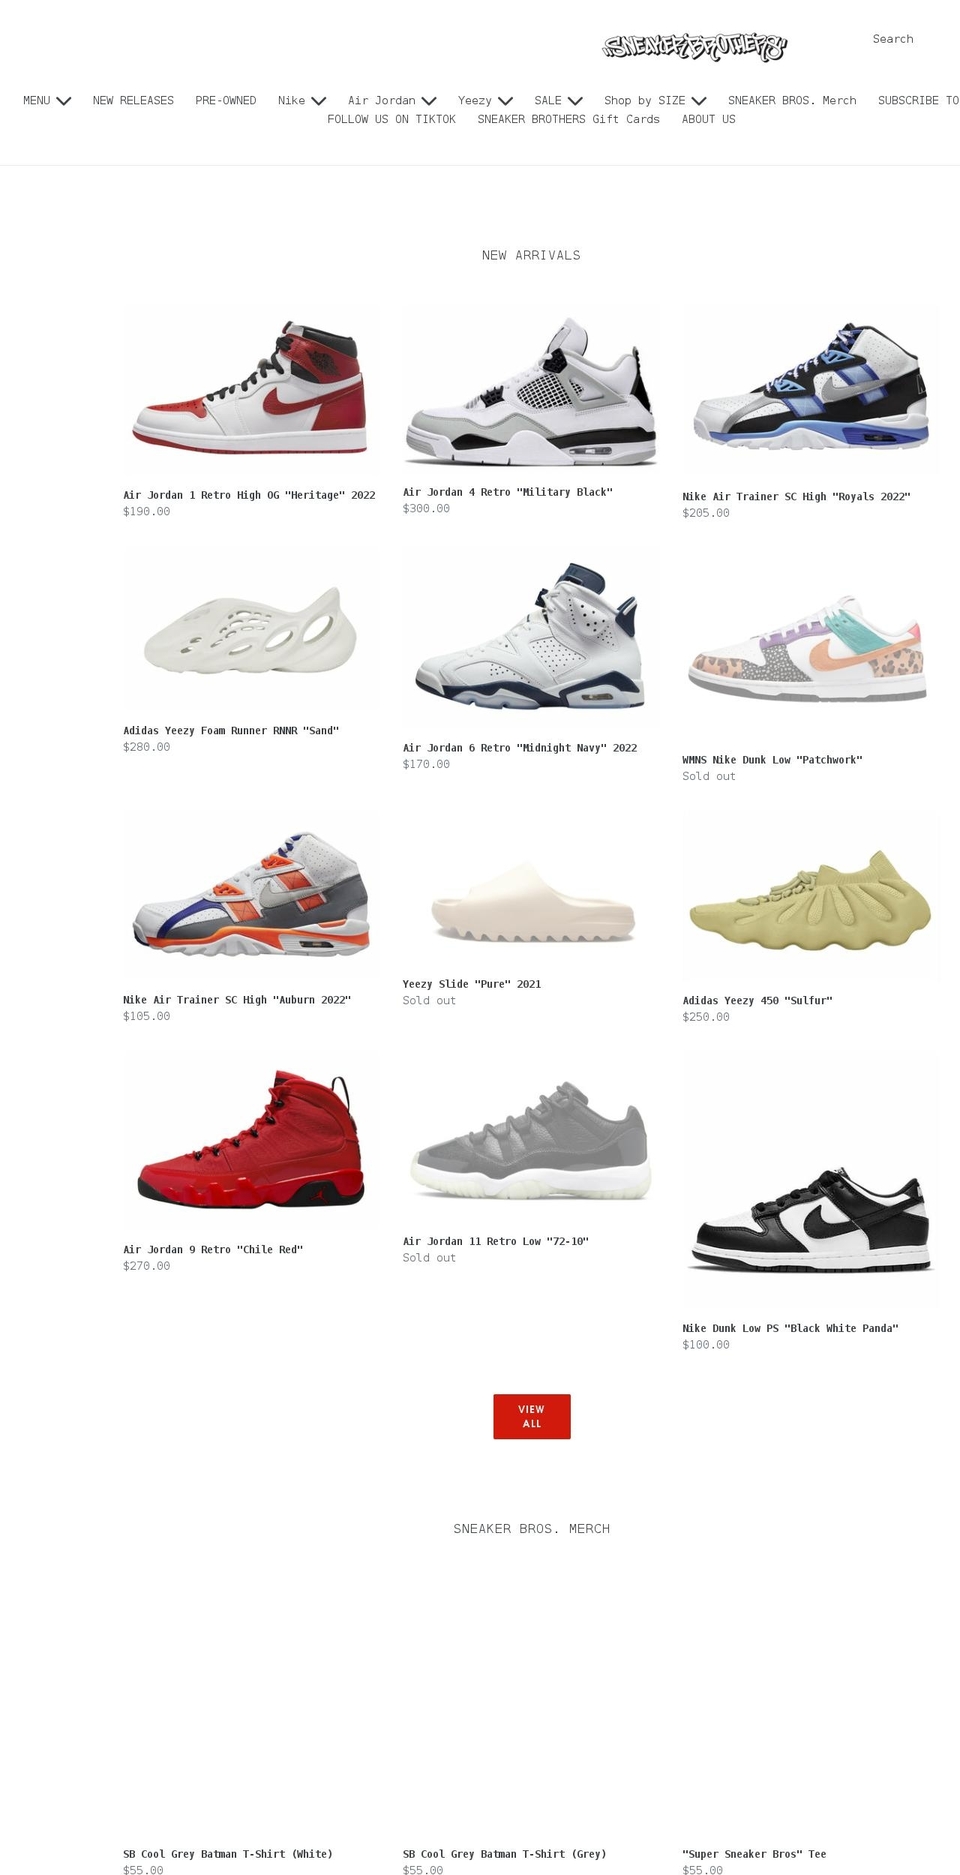 virtu Shopify theme site example thesneakerbrothers.com